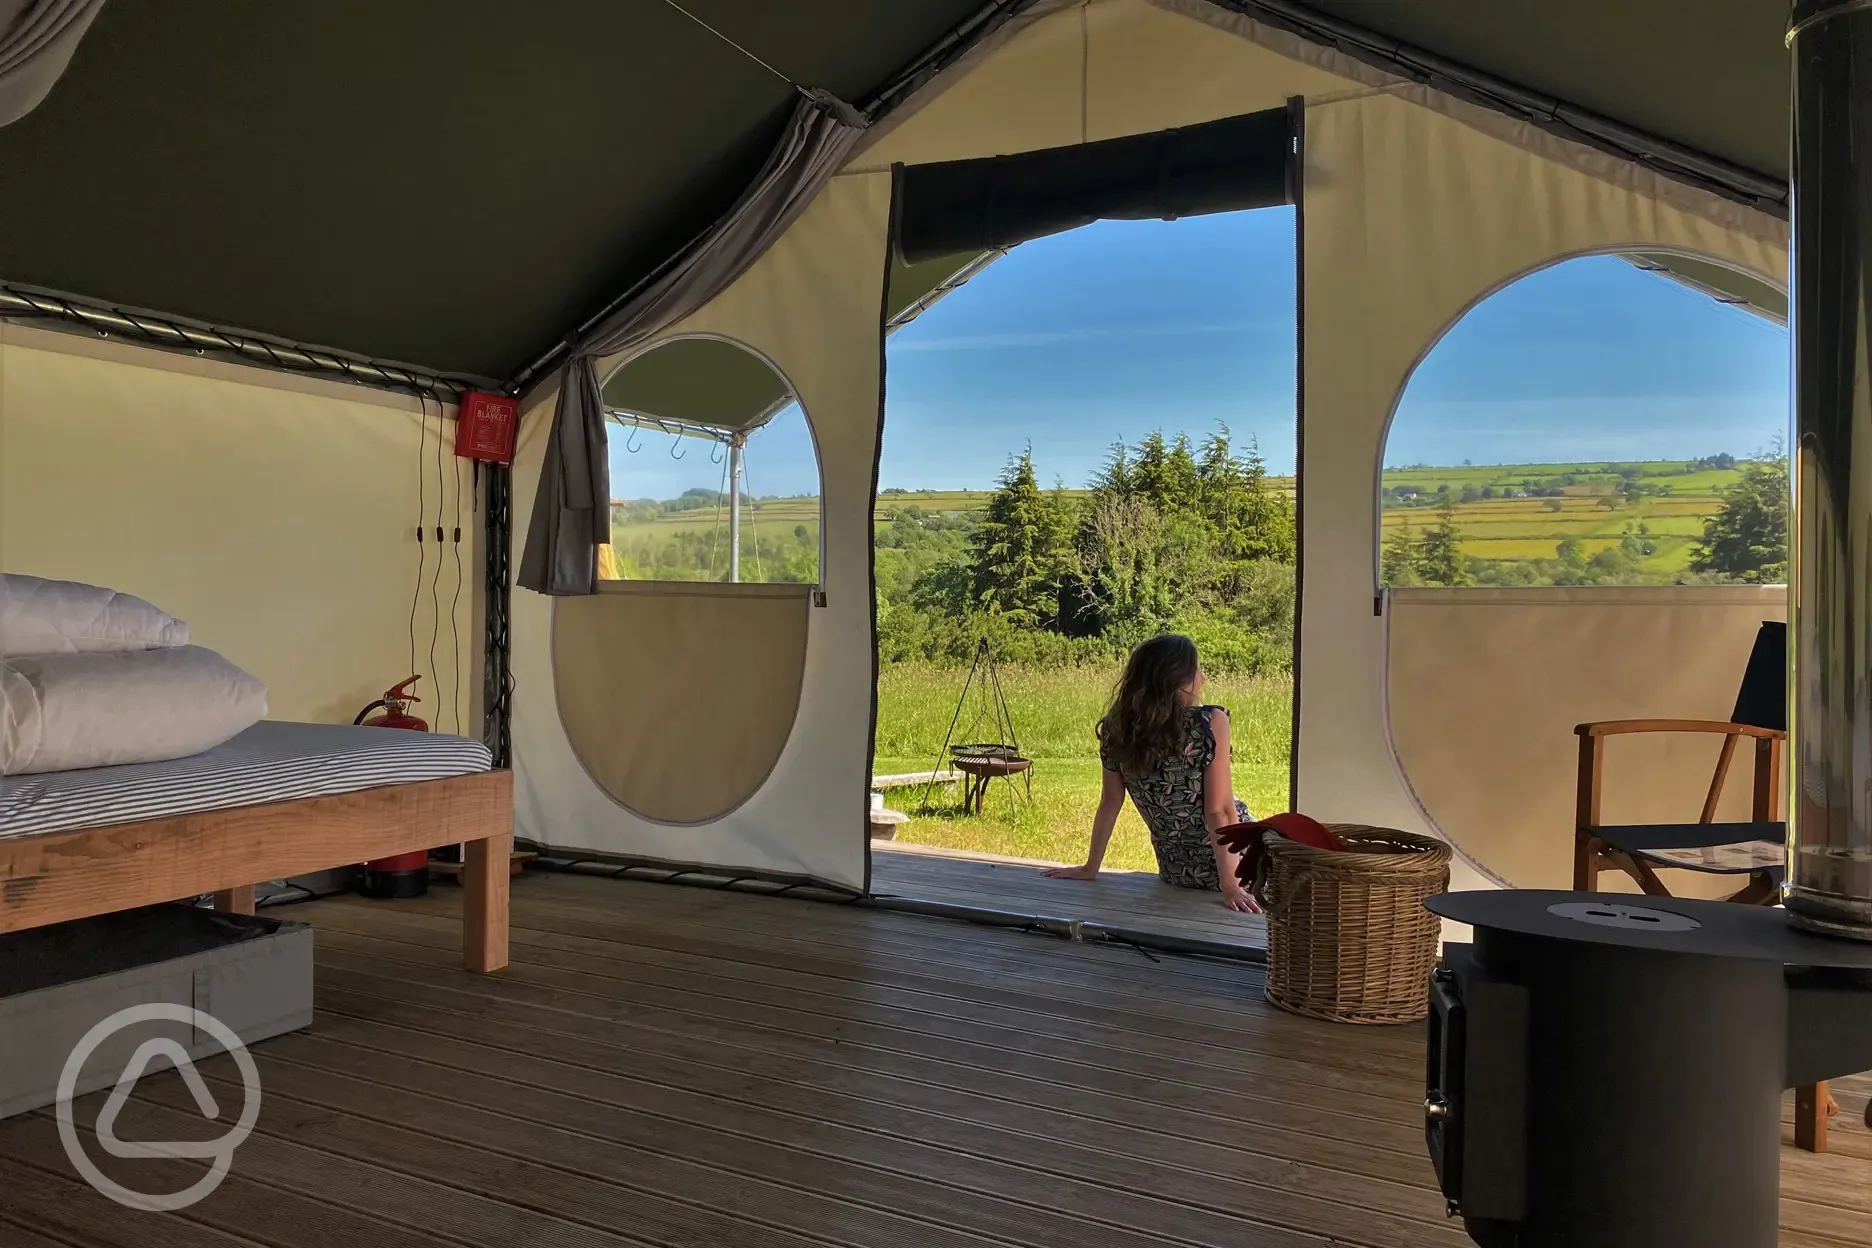 Relax and enjoy the views from the Pioneer Camps